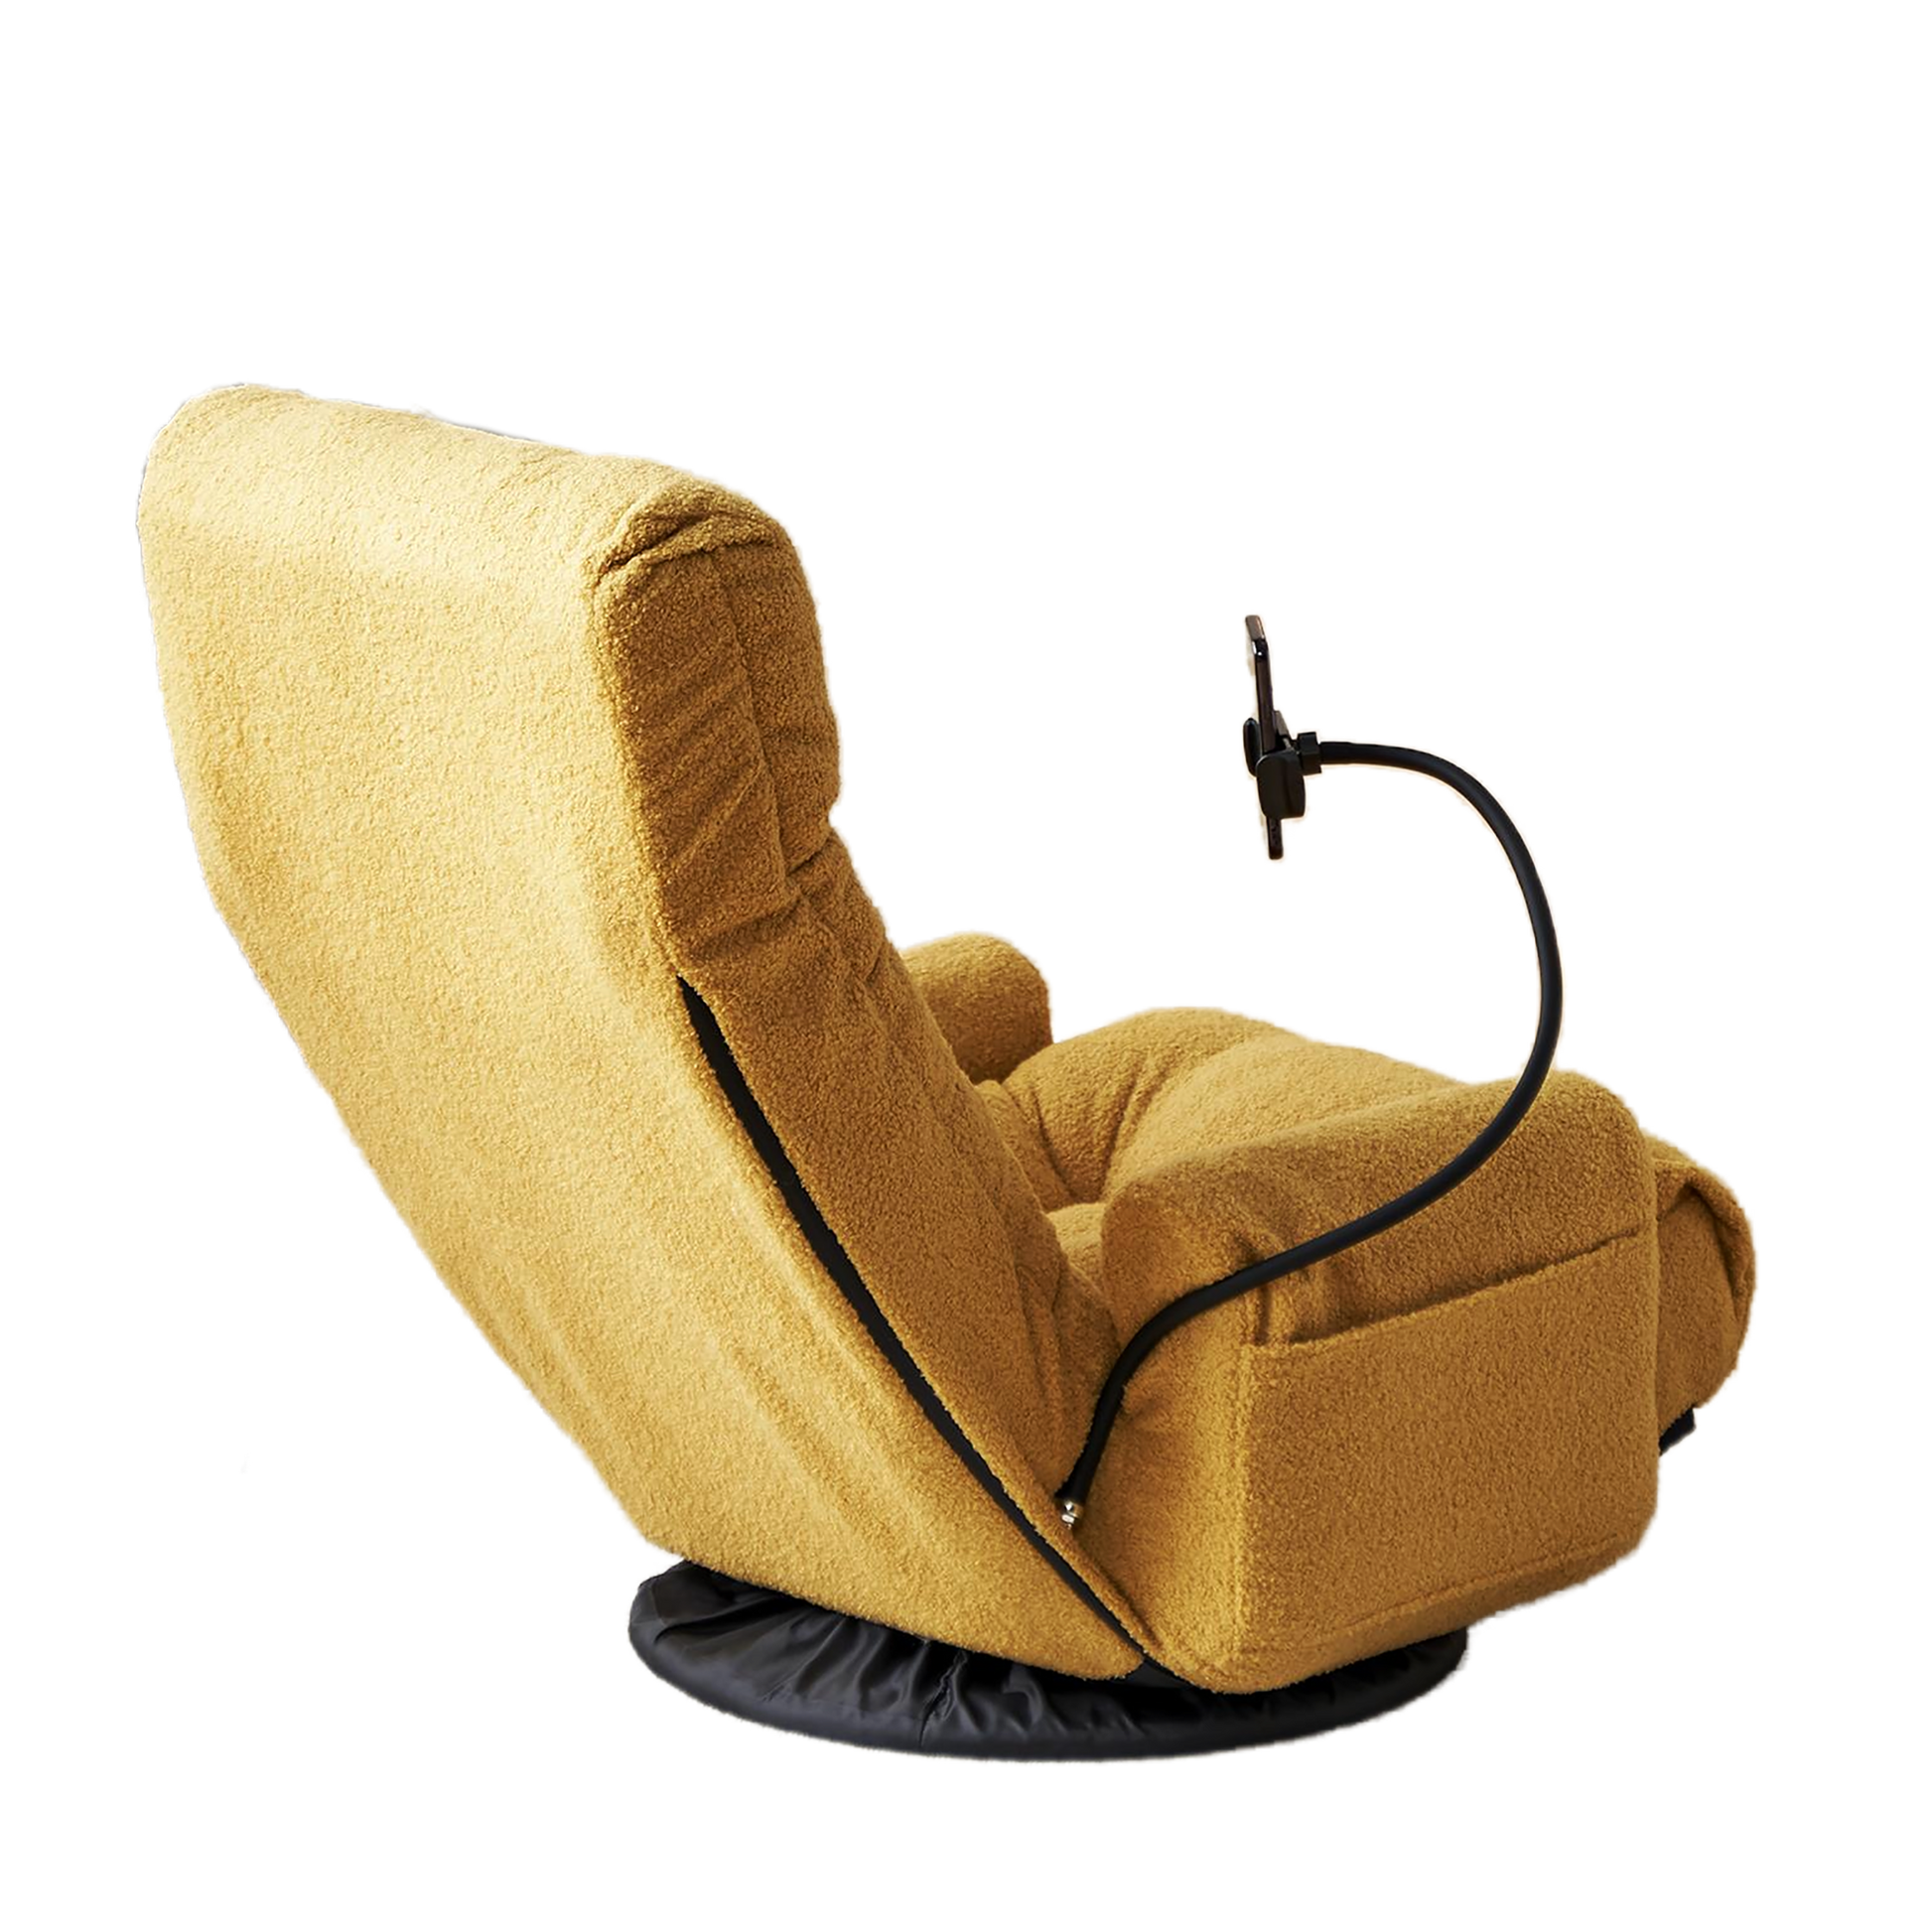 Adjustable Head And Waist, Game Chair, Lounge